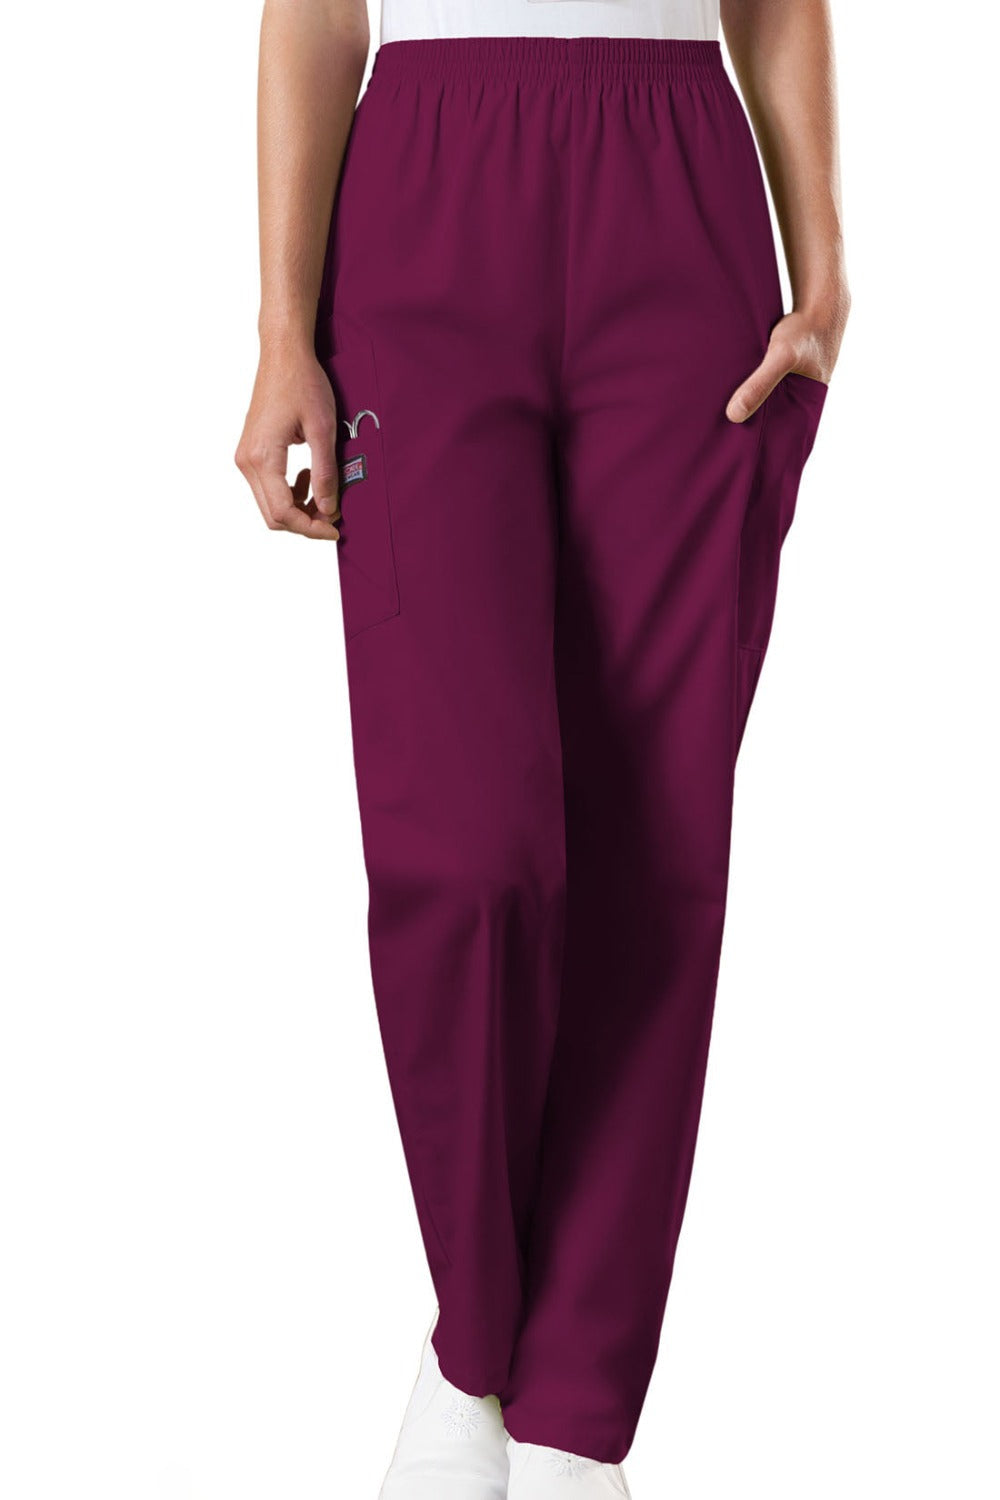 Cherokee Workwear Pants Pull On 4200  in Wine at Parker's Clothing and Shoes.